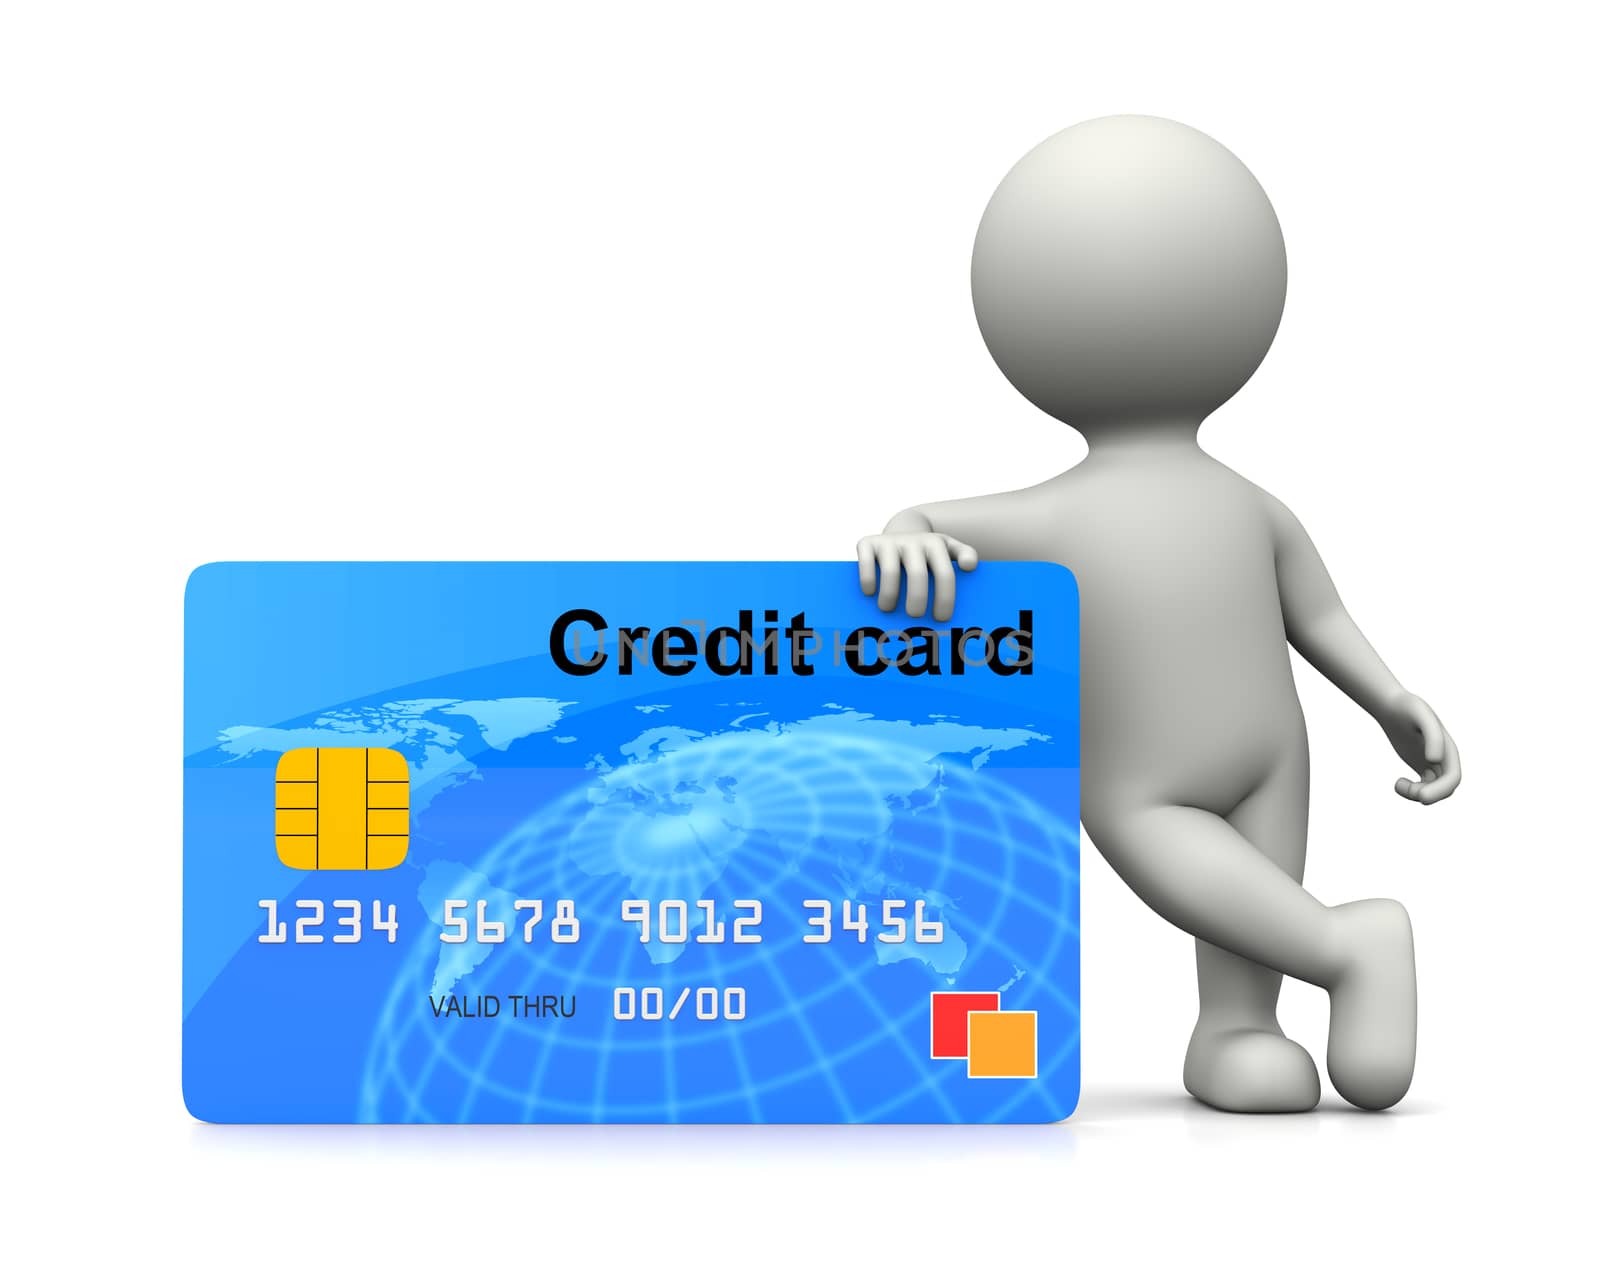 White 3D Character Leaned on a Credit Card 3D Illustration on White Background